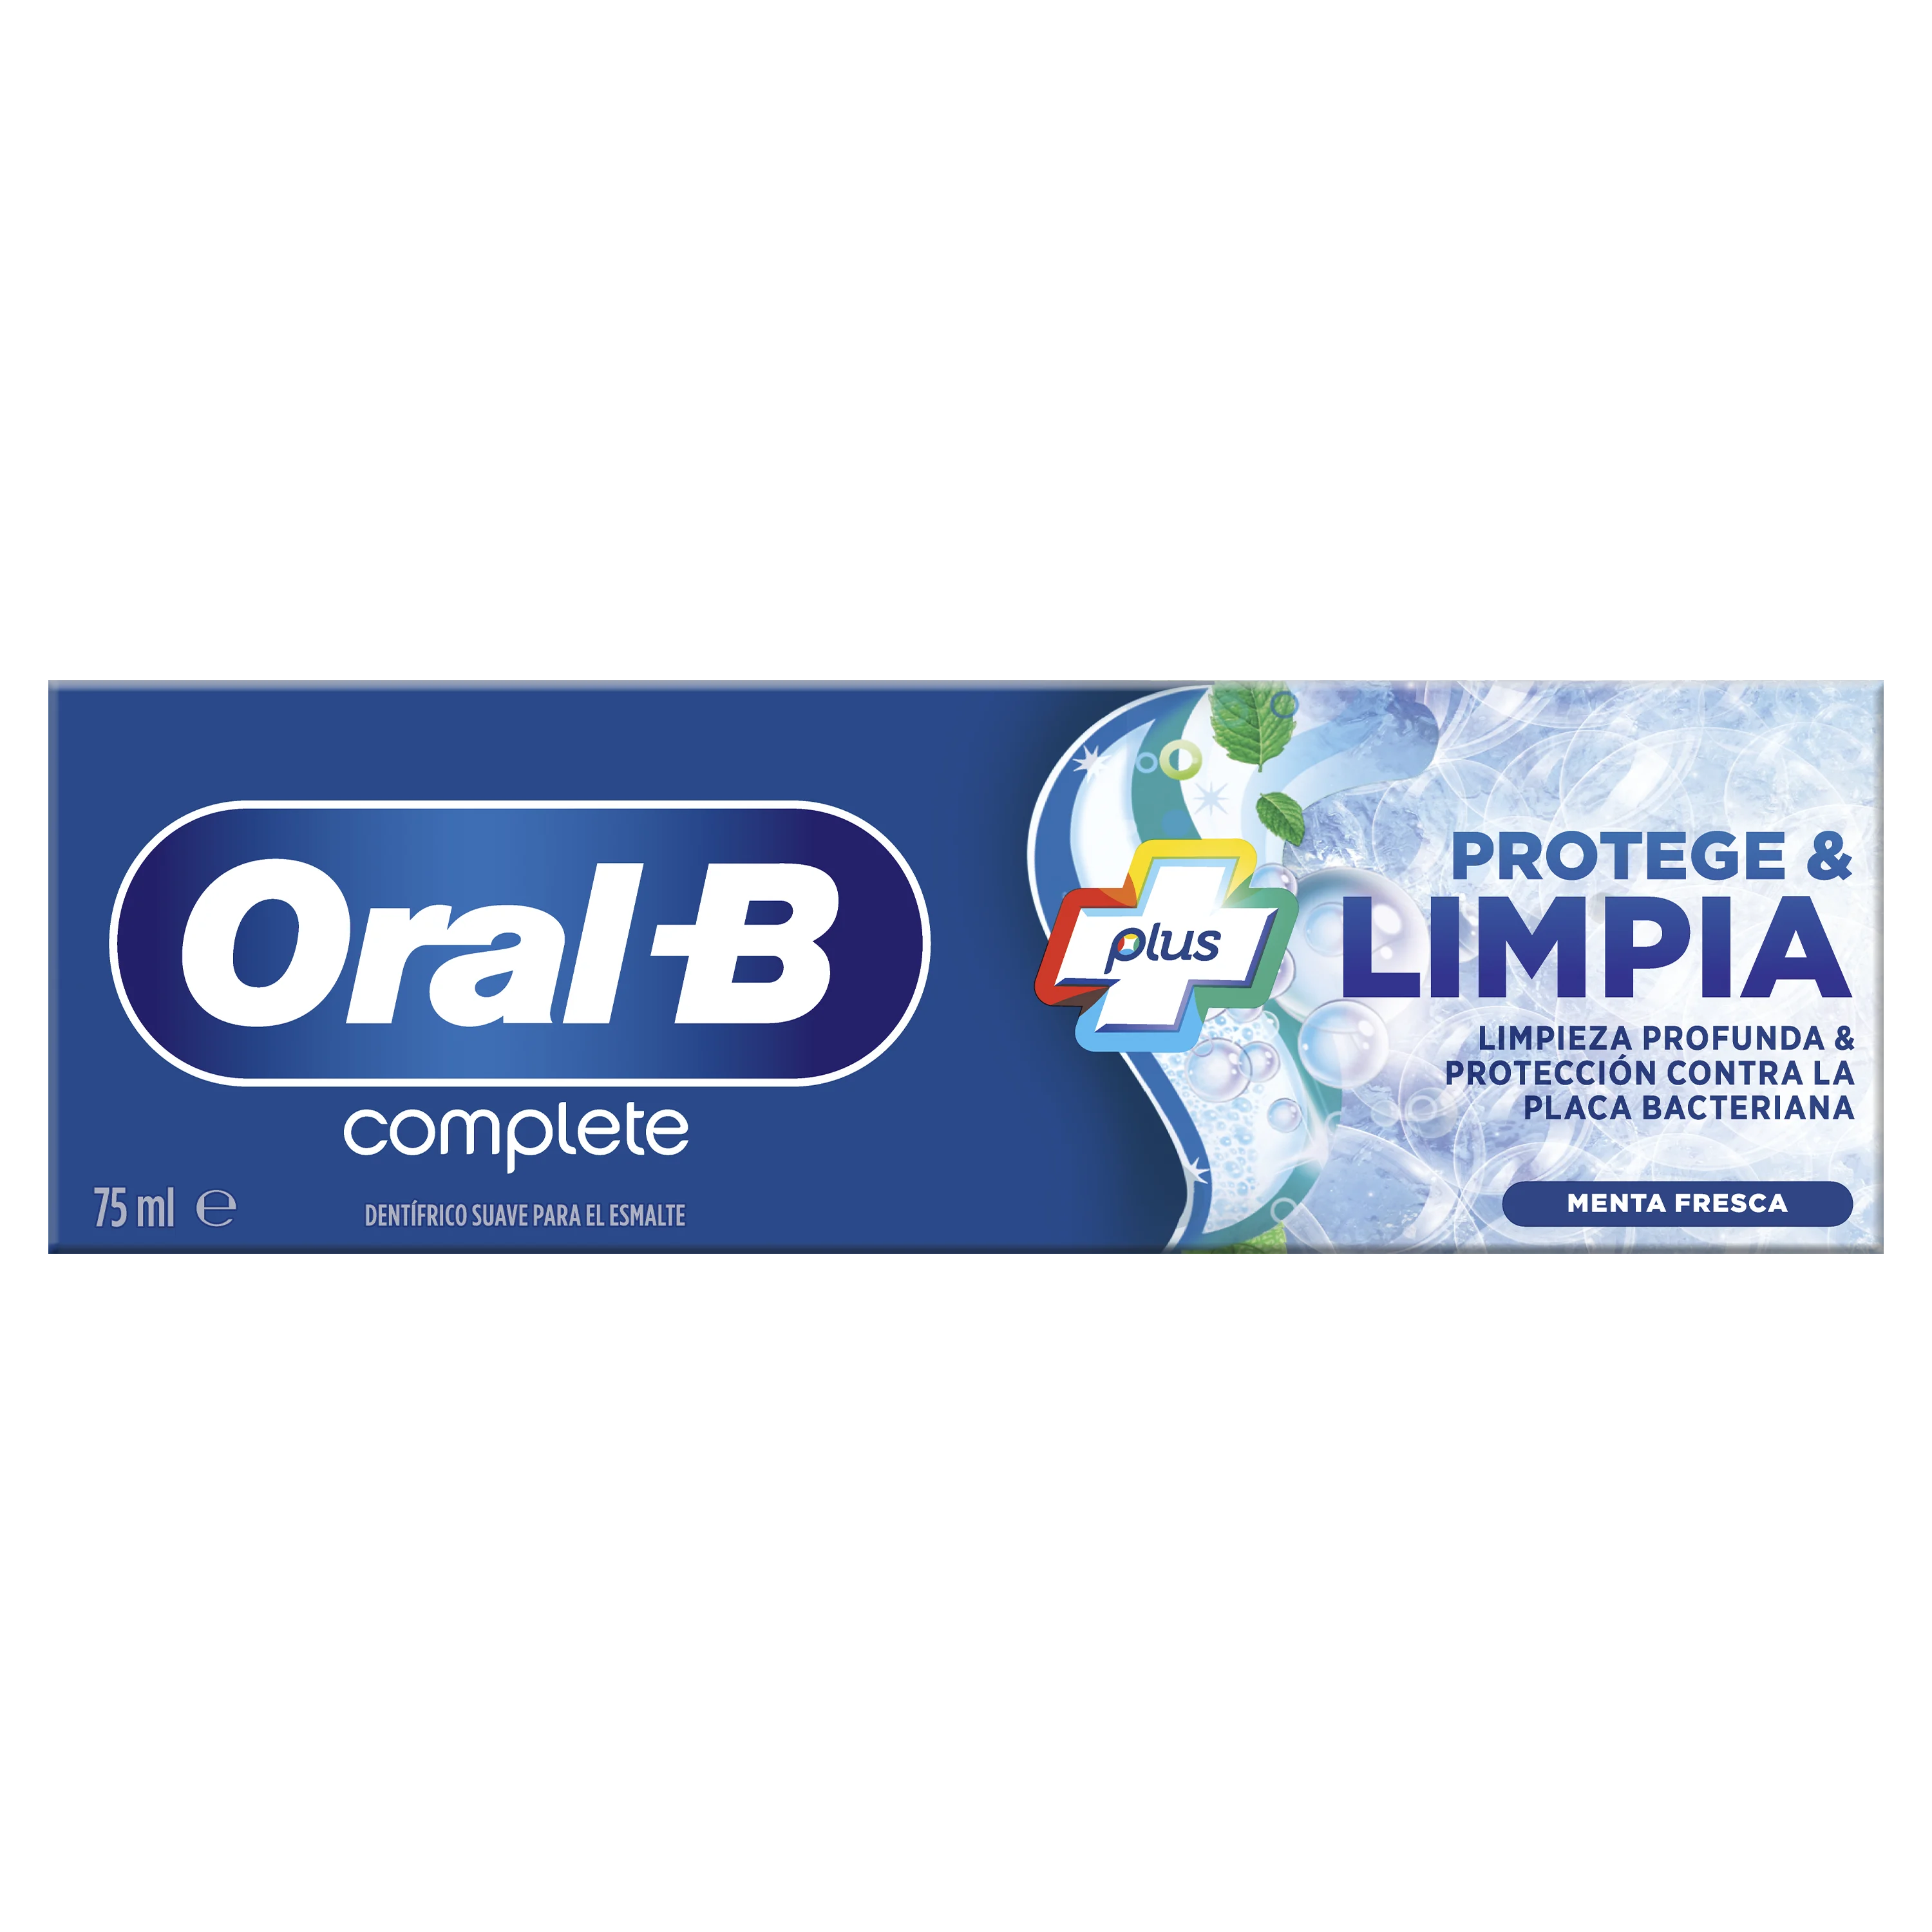 Oral-B Complete Protege & Limpia undefined